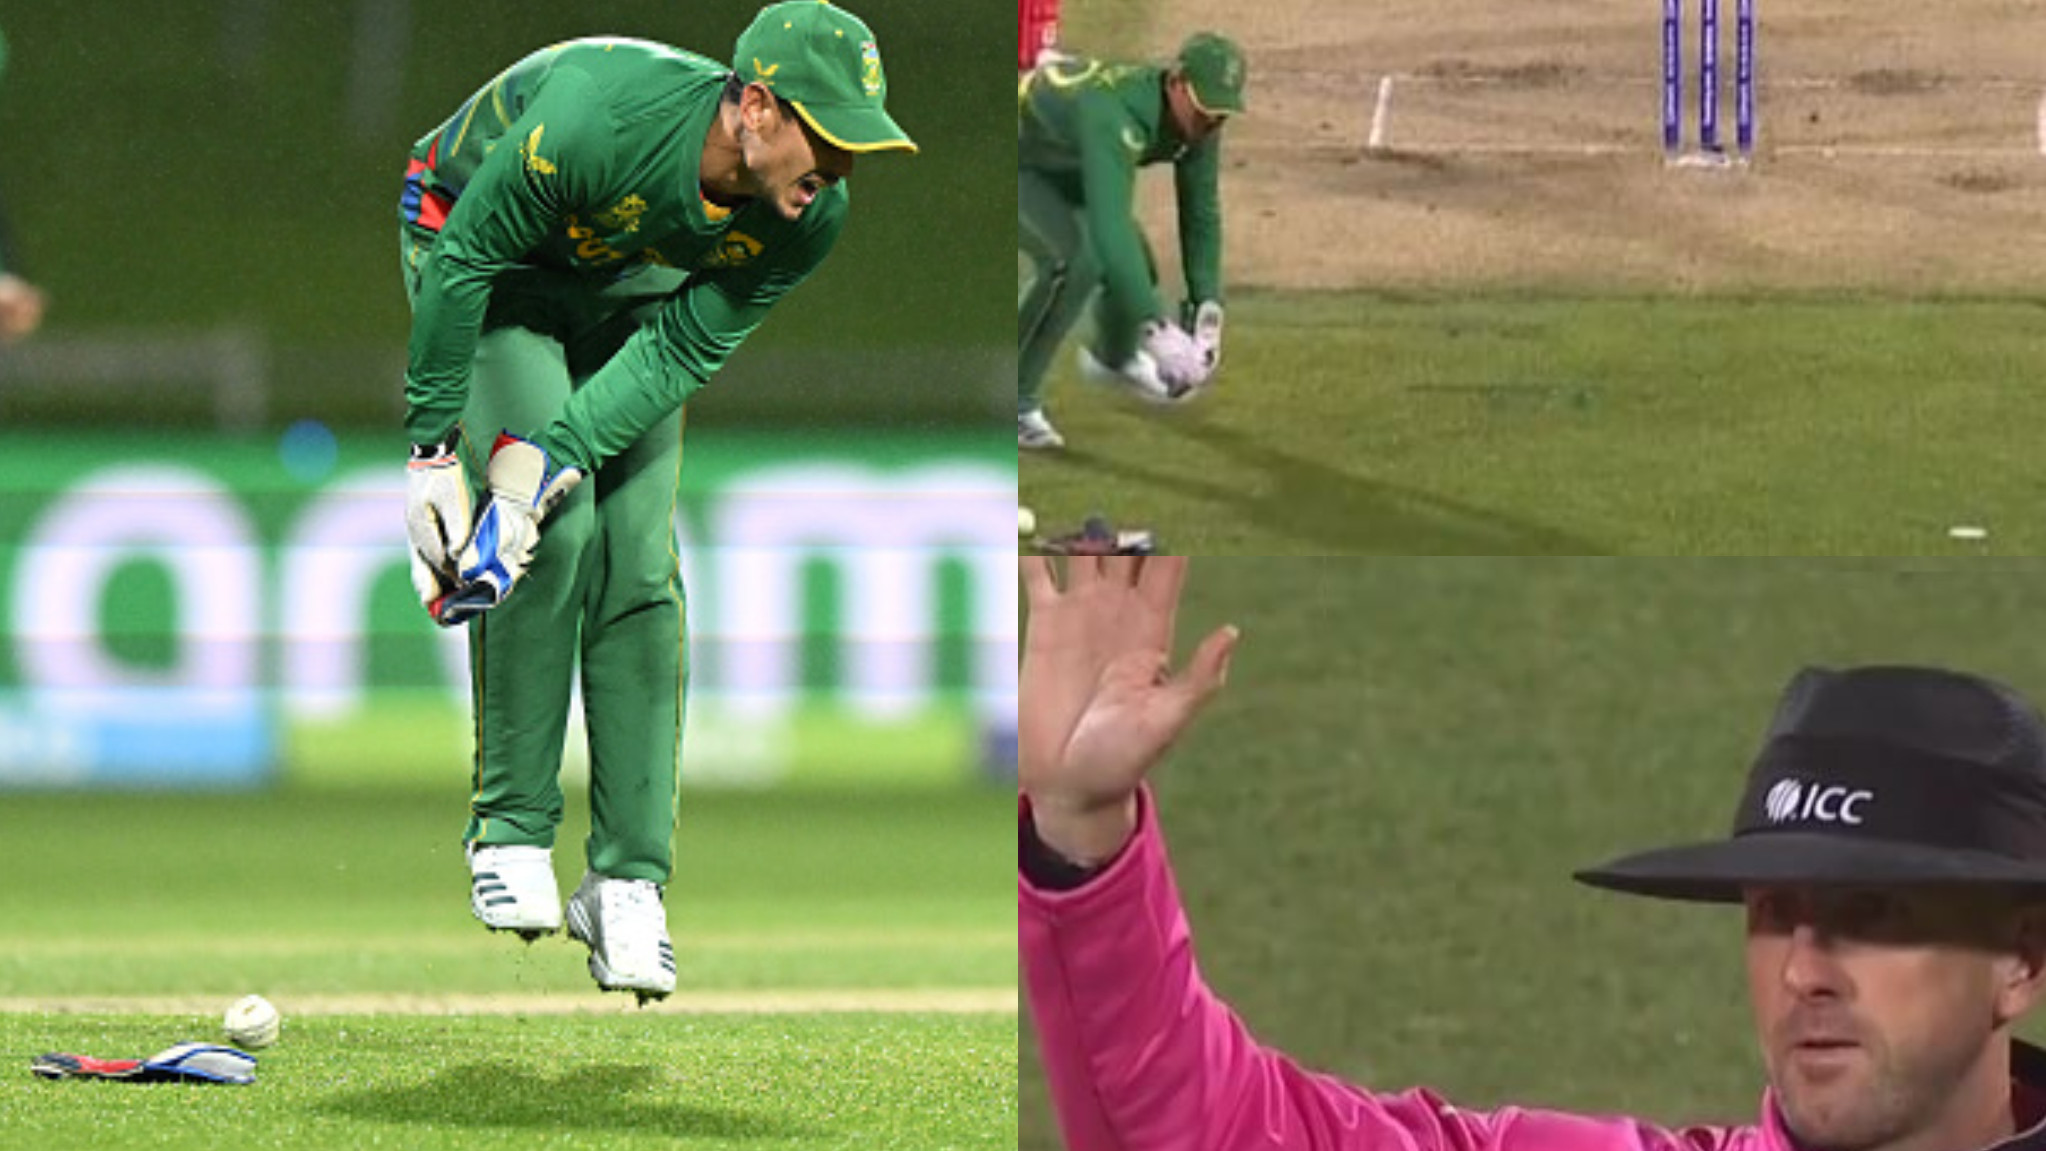 T20 World Cup 2022: WATCH- South Africa penalized 5 runs after ball touches De Kock’s glove on the ground in a rare instance